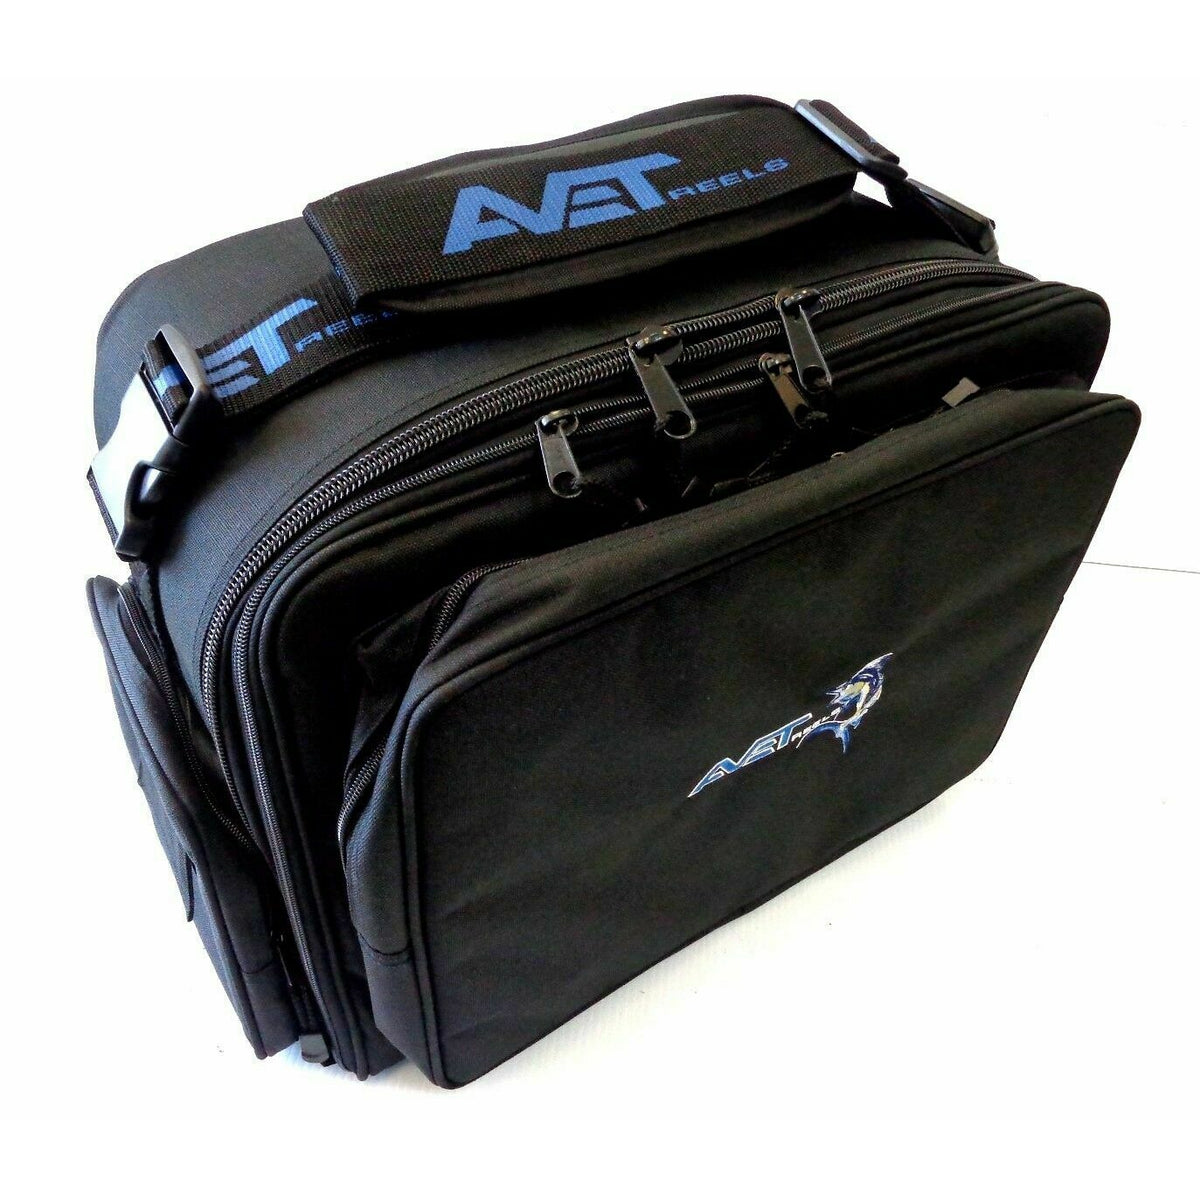 Daiwa Saltwater Fishing Tackle Boxes & Bags for sale